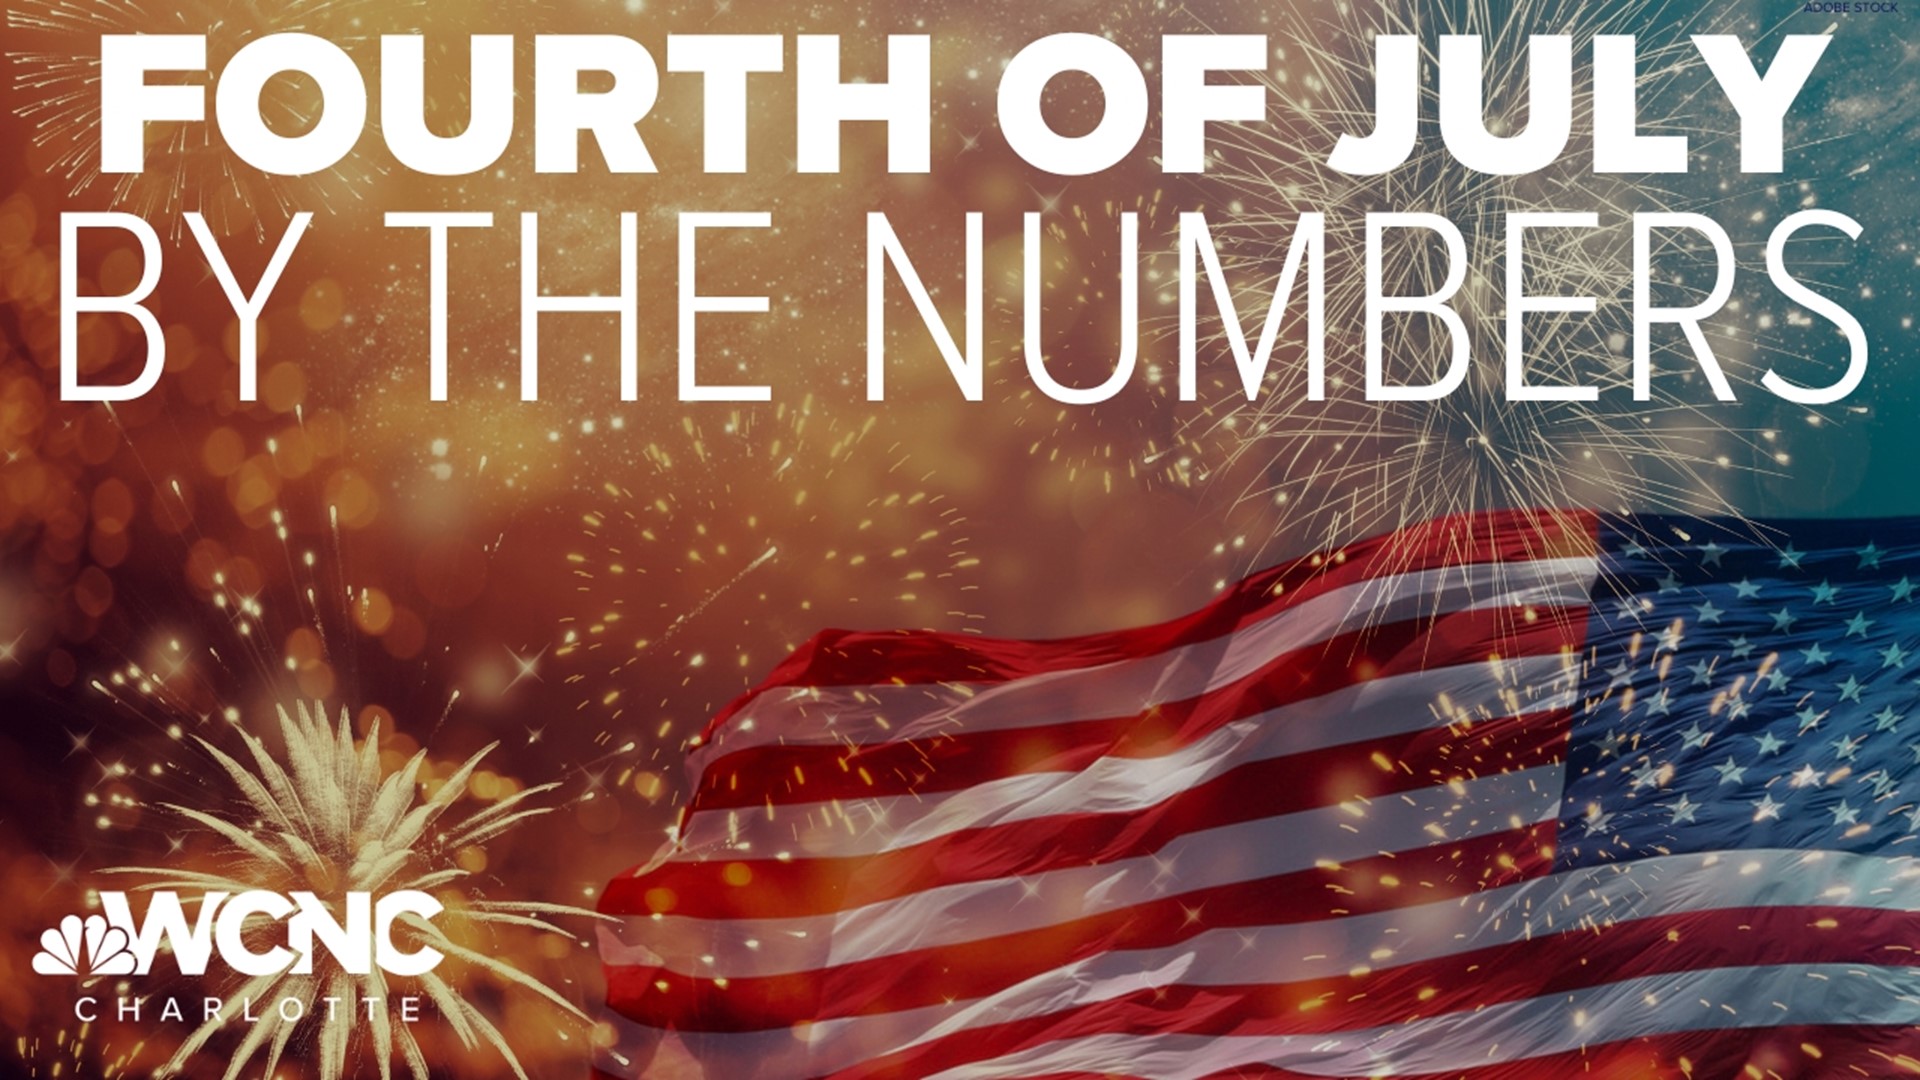 According to Wallet Hub, there are 14,000 firework displays every Fourth of July nationwide.